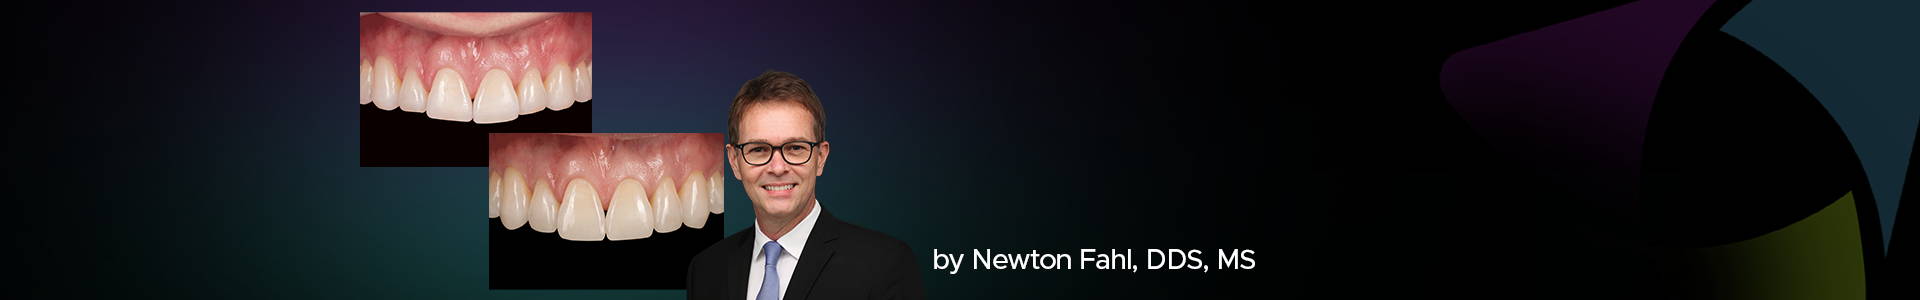 blog banner featuring Dr Newton Fahl and two clinical images behind him